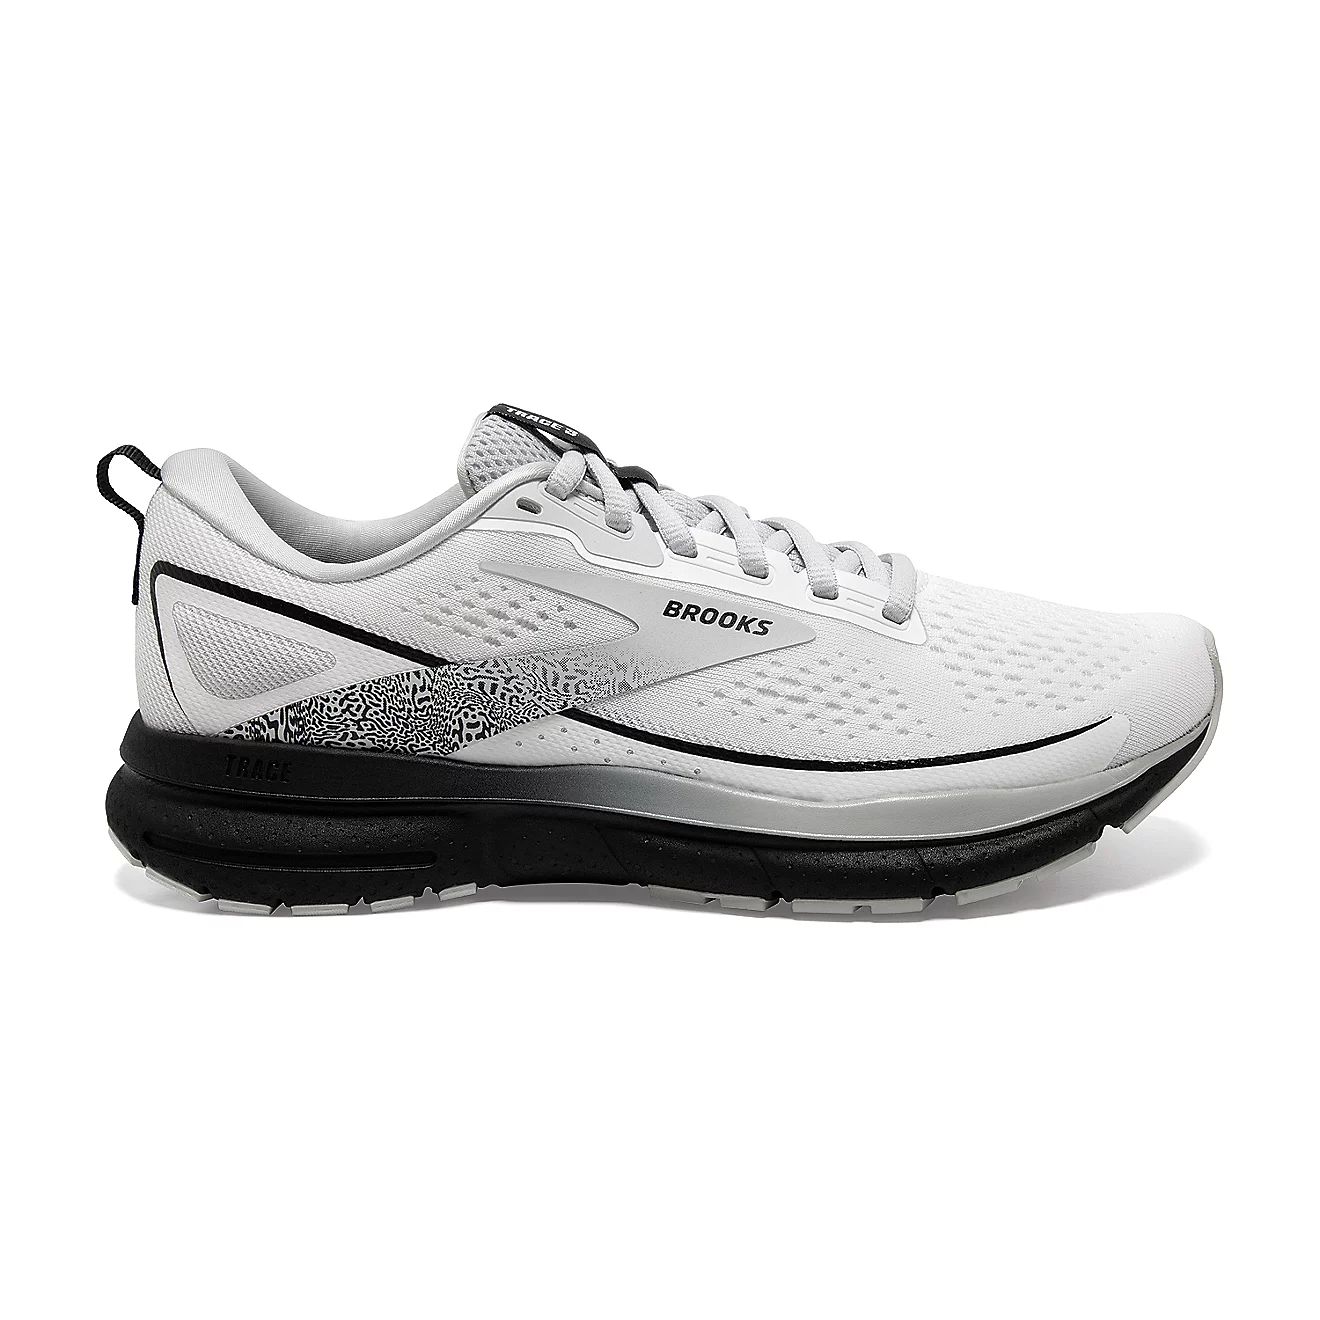 Brooks Women's Trace 3 Running Shoes | Free Shipping at Academy | Academy Sports + Outdoors